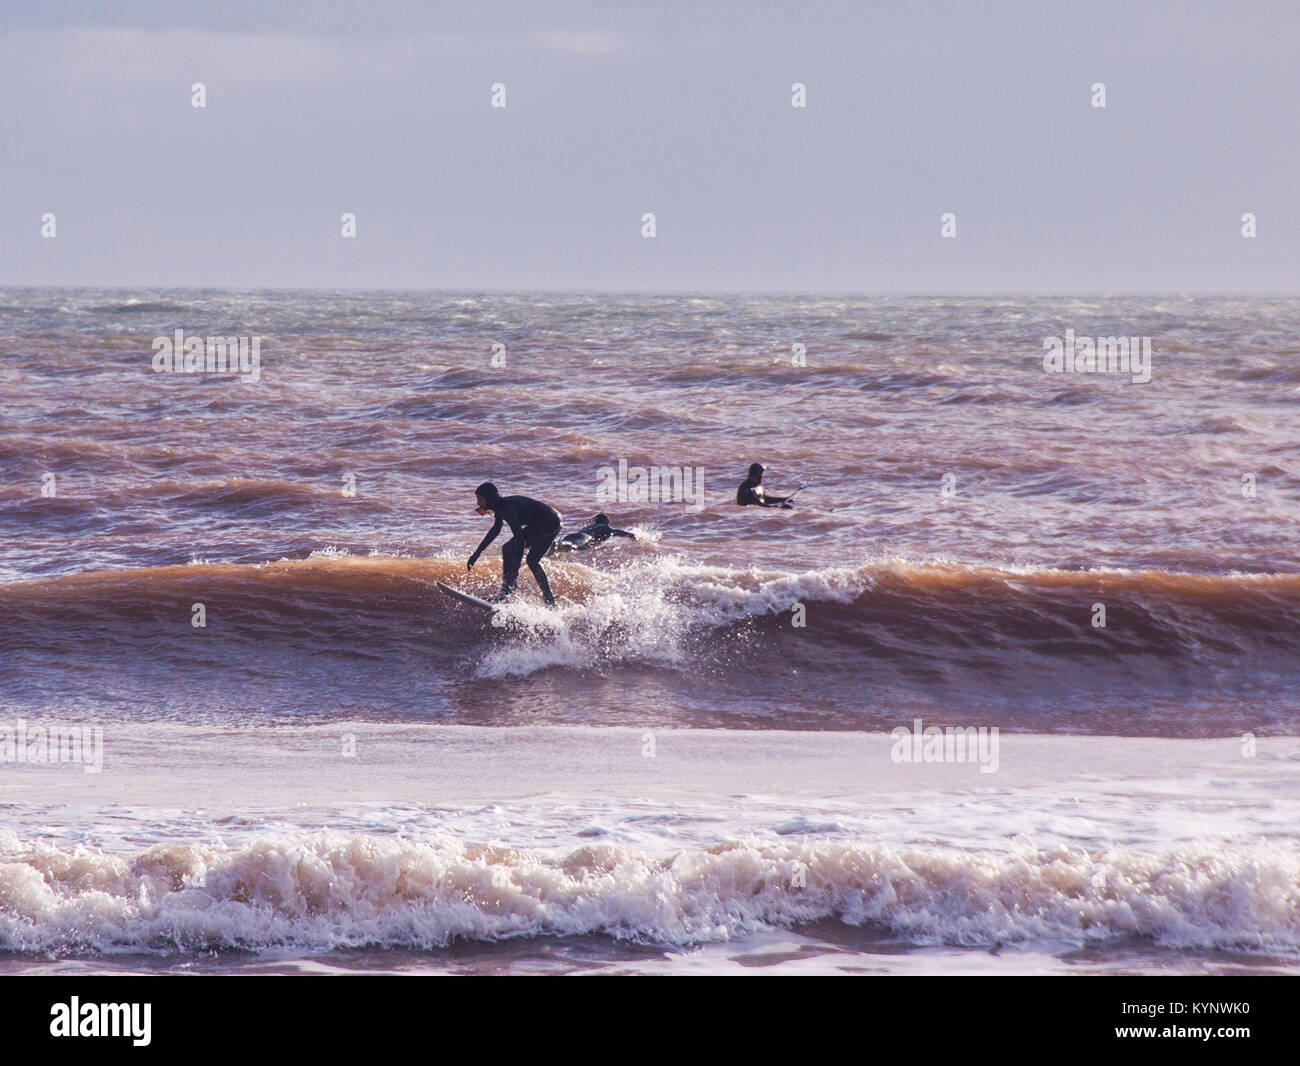 Sidmouth, 15th Jan 18 Strong winds produced good conditions for surfing at sea kayaking at Sidmouth, Devon. The sea turns red at Sidmouth in stormy conditions, as the local red sandstone mixes with the force of the sea. Credit: Photo Central/Alamy Live News Stock Photo